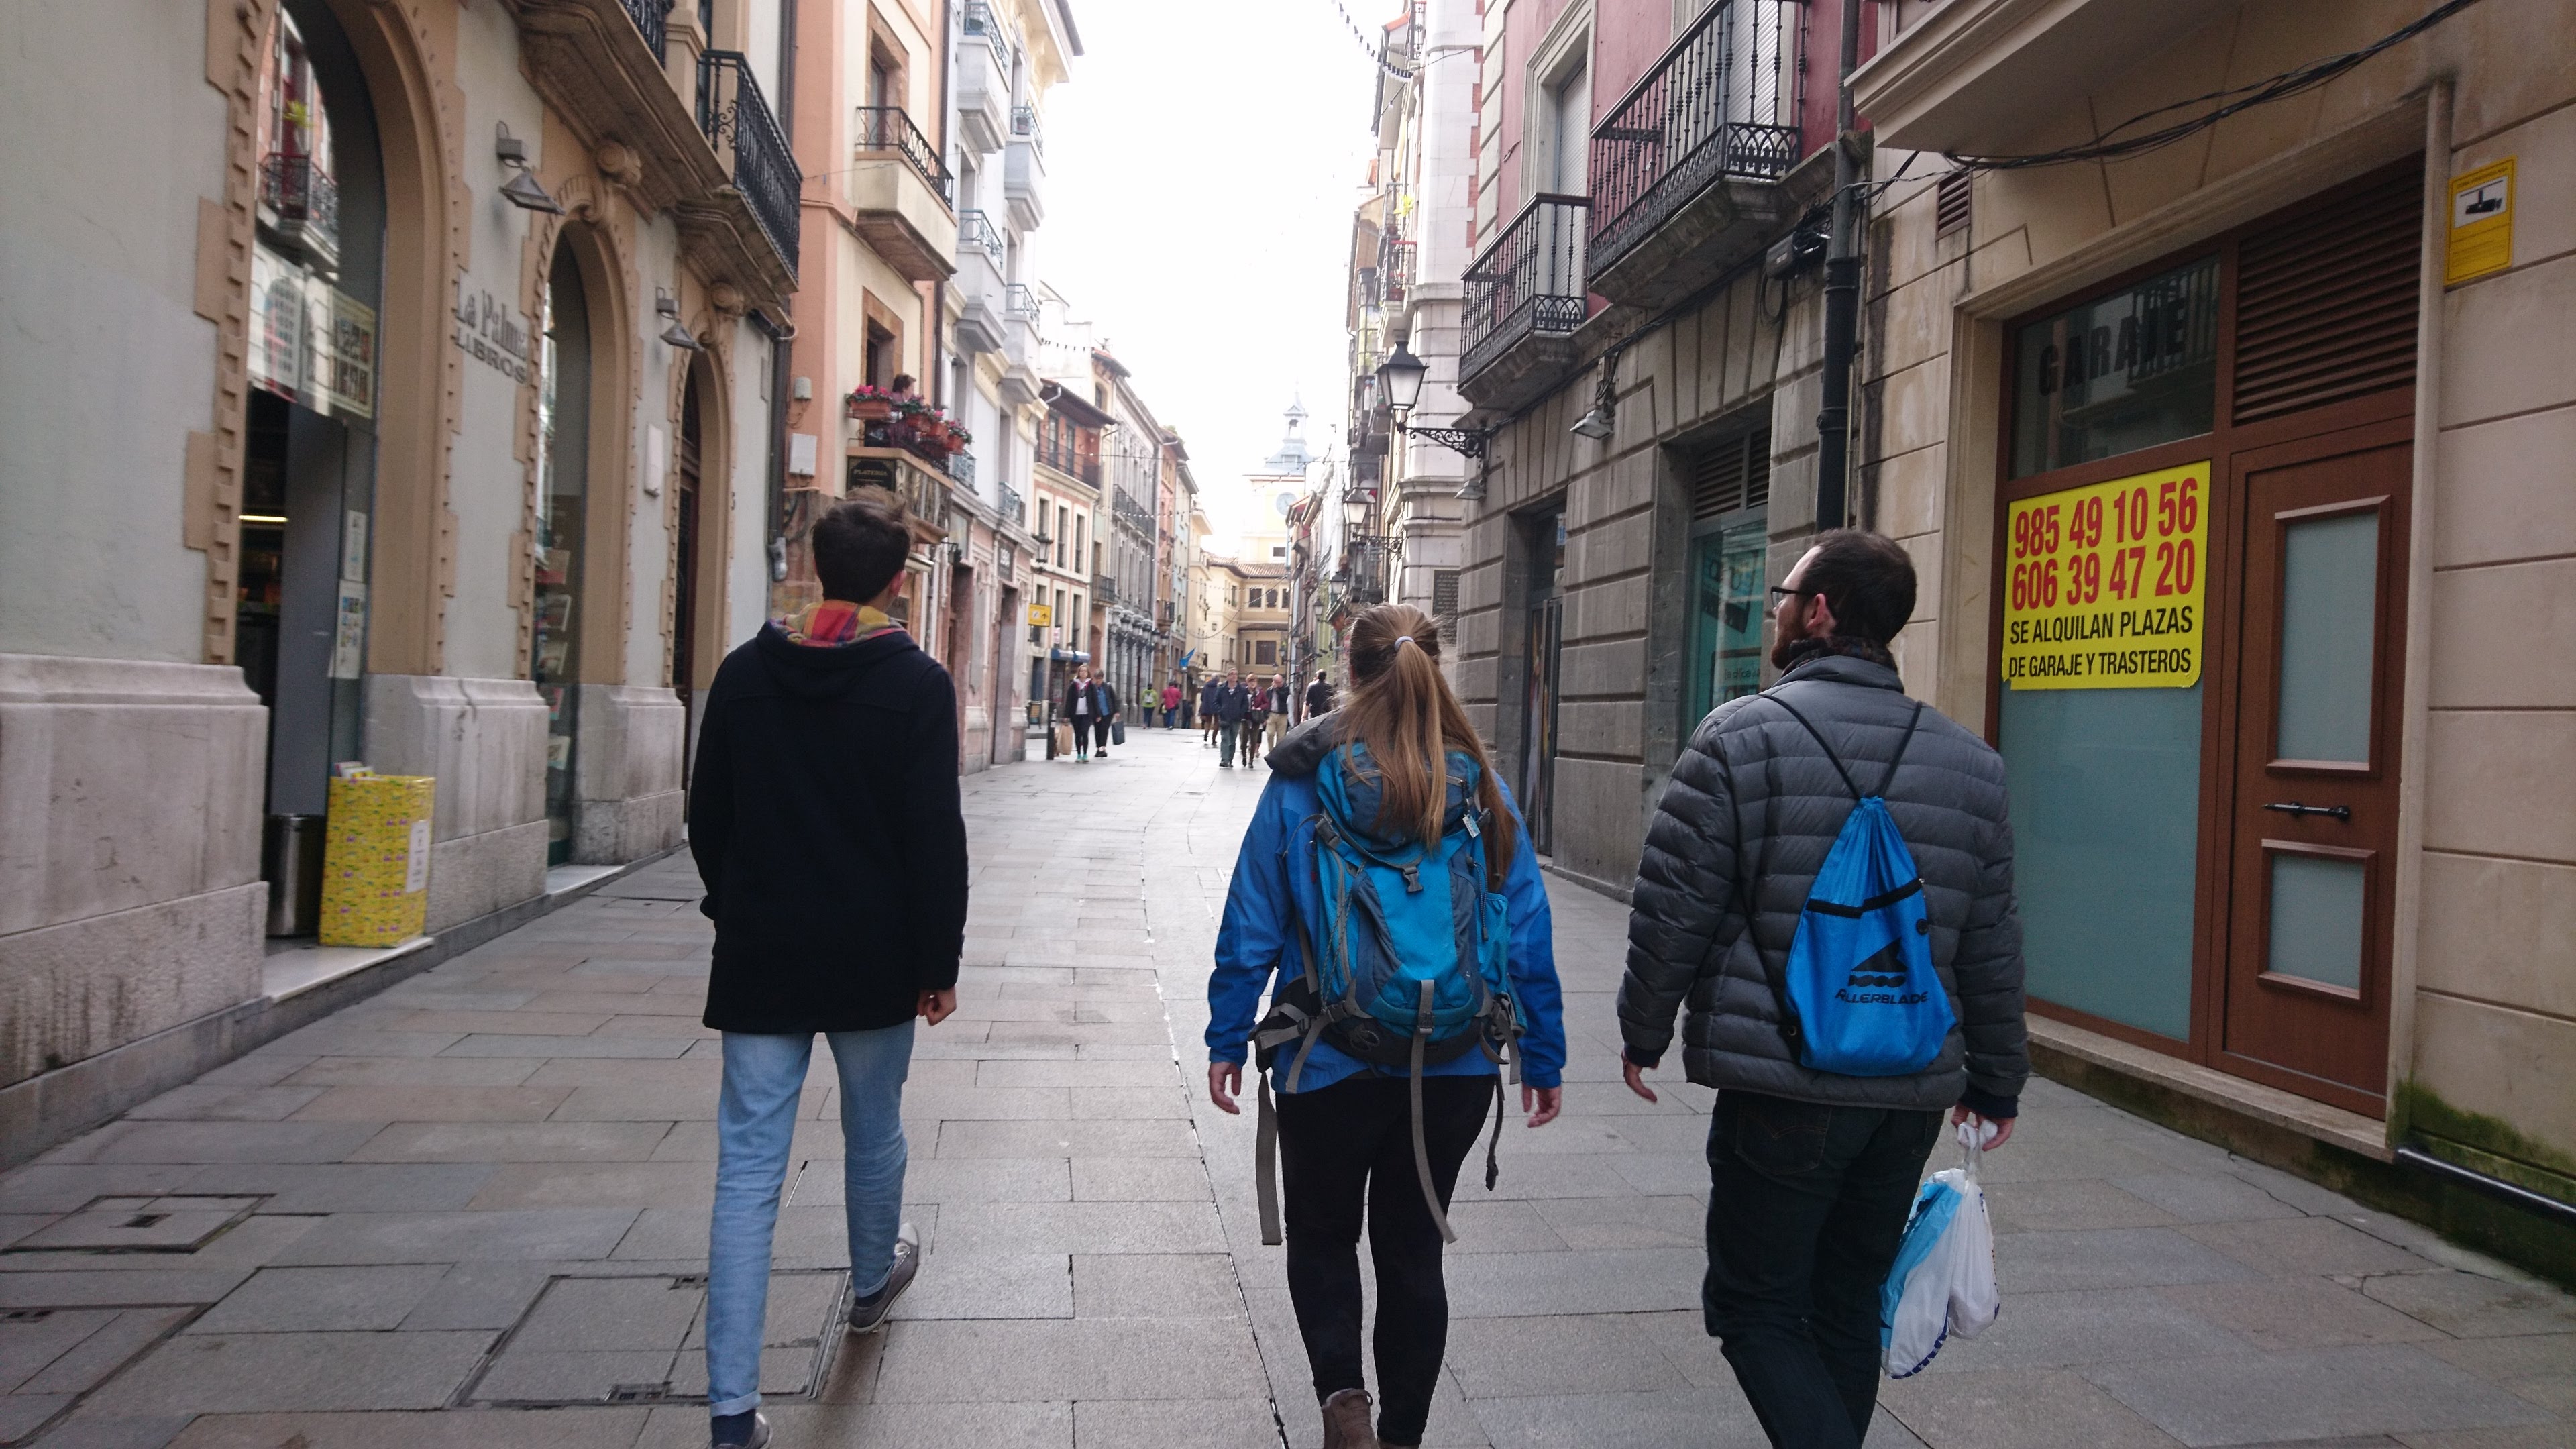 Students in Oviedo